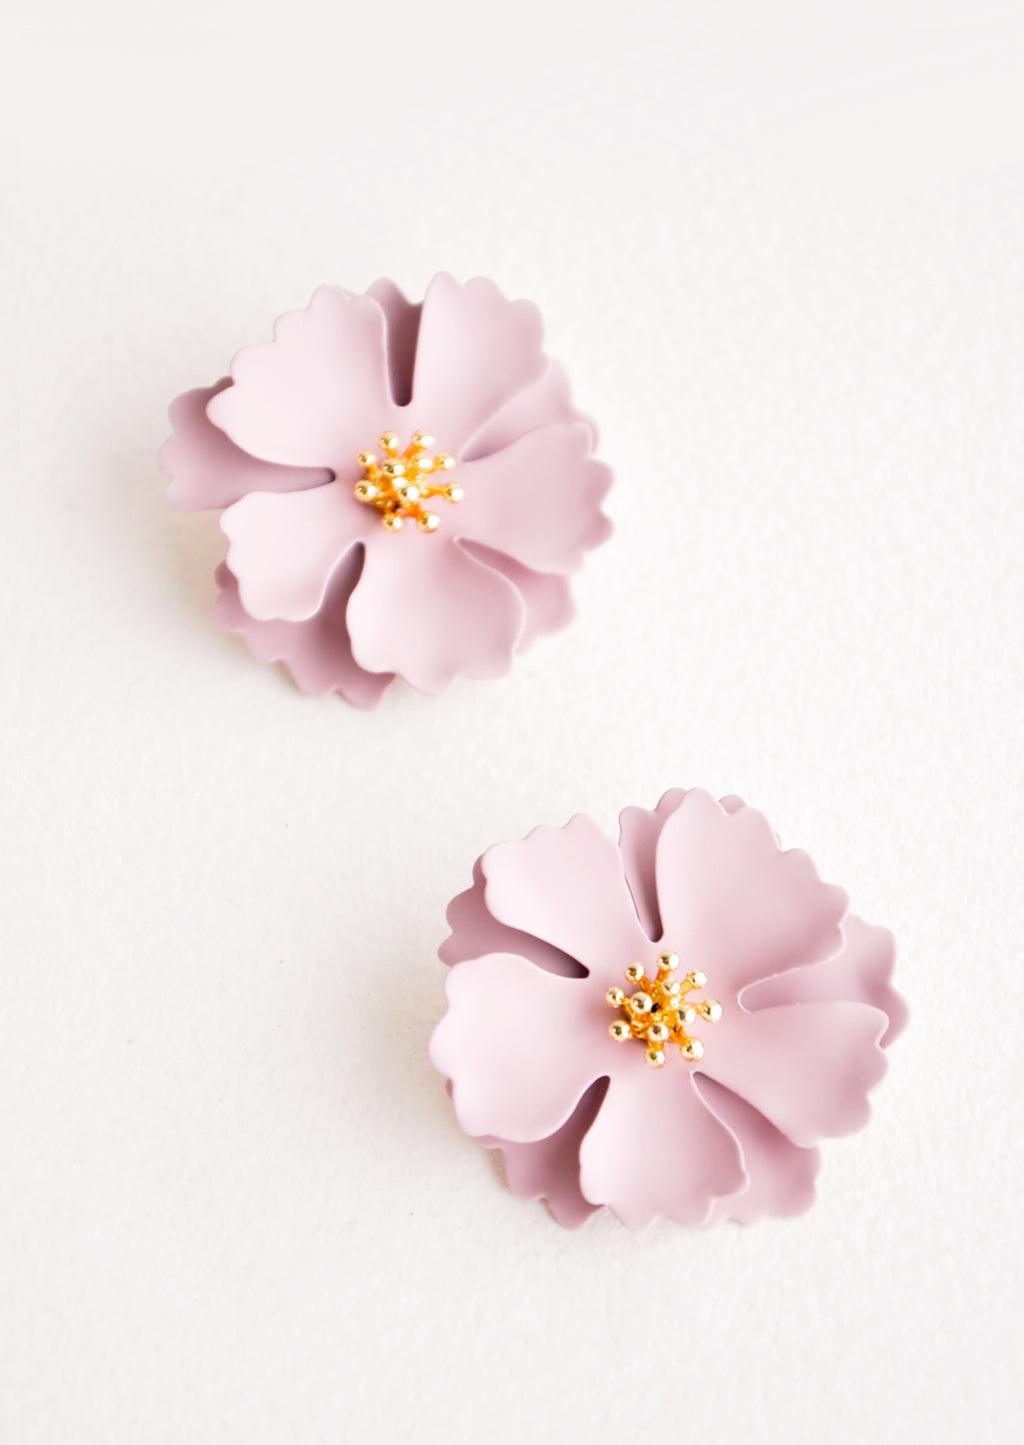 Lilac: Blooming Magnolia Earrings in Lilac - LEIF